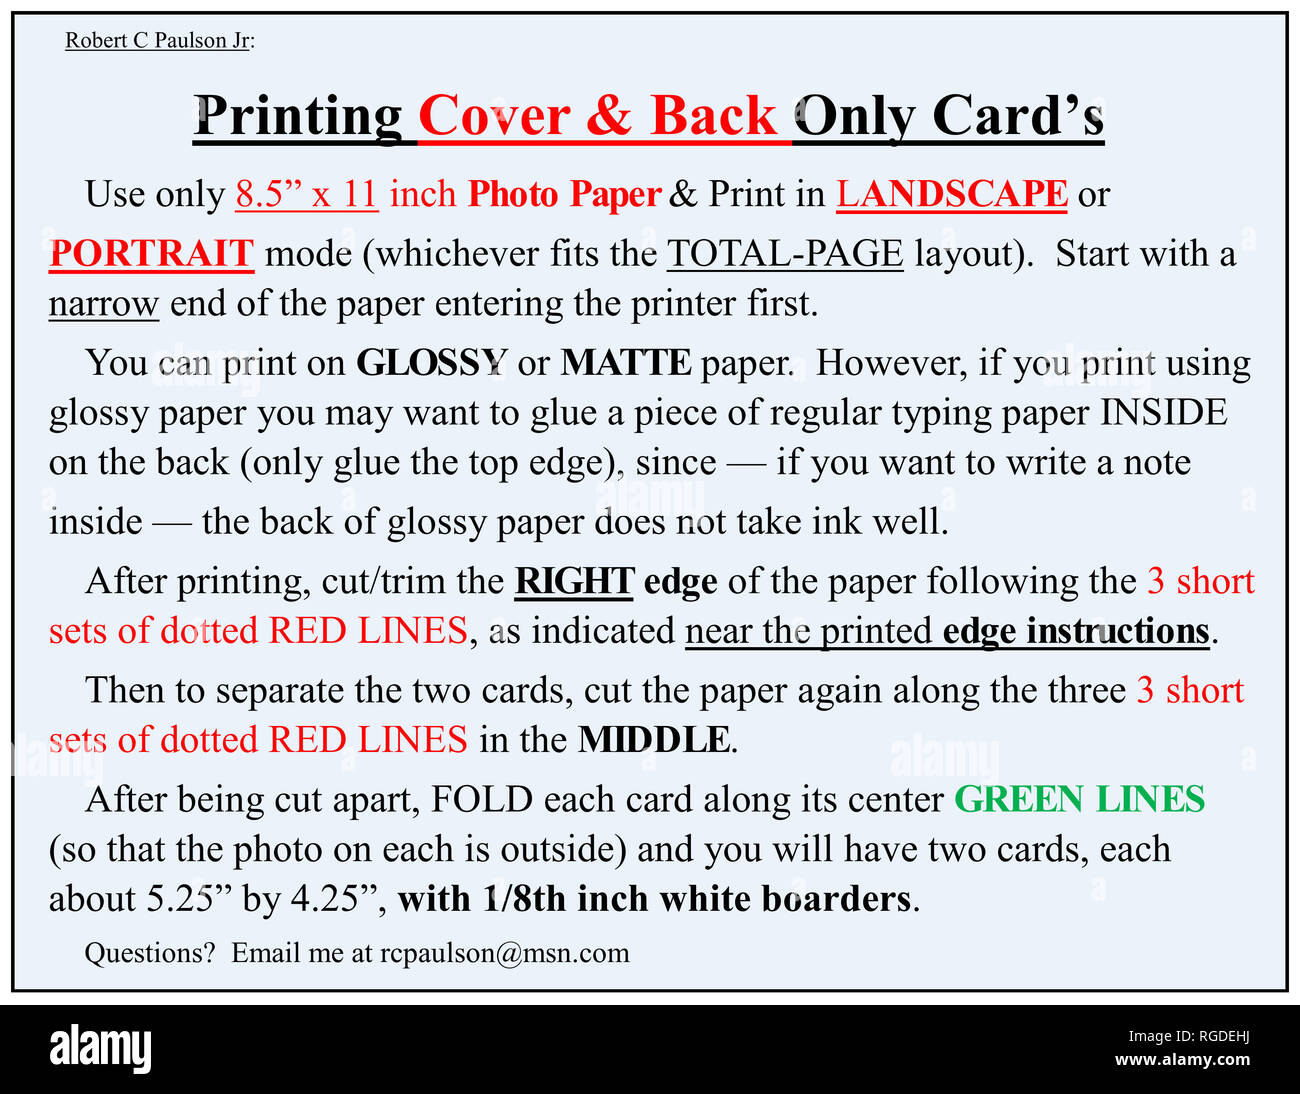 How to PRINT, CUT, and FOLD Robert C Paulson Jr's 2-sided photo cards. Stock Photo